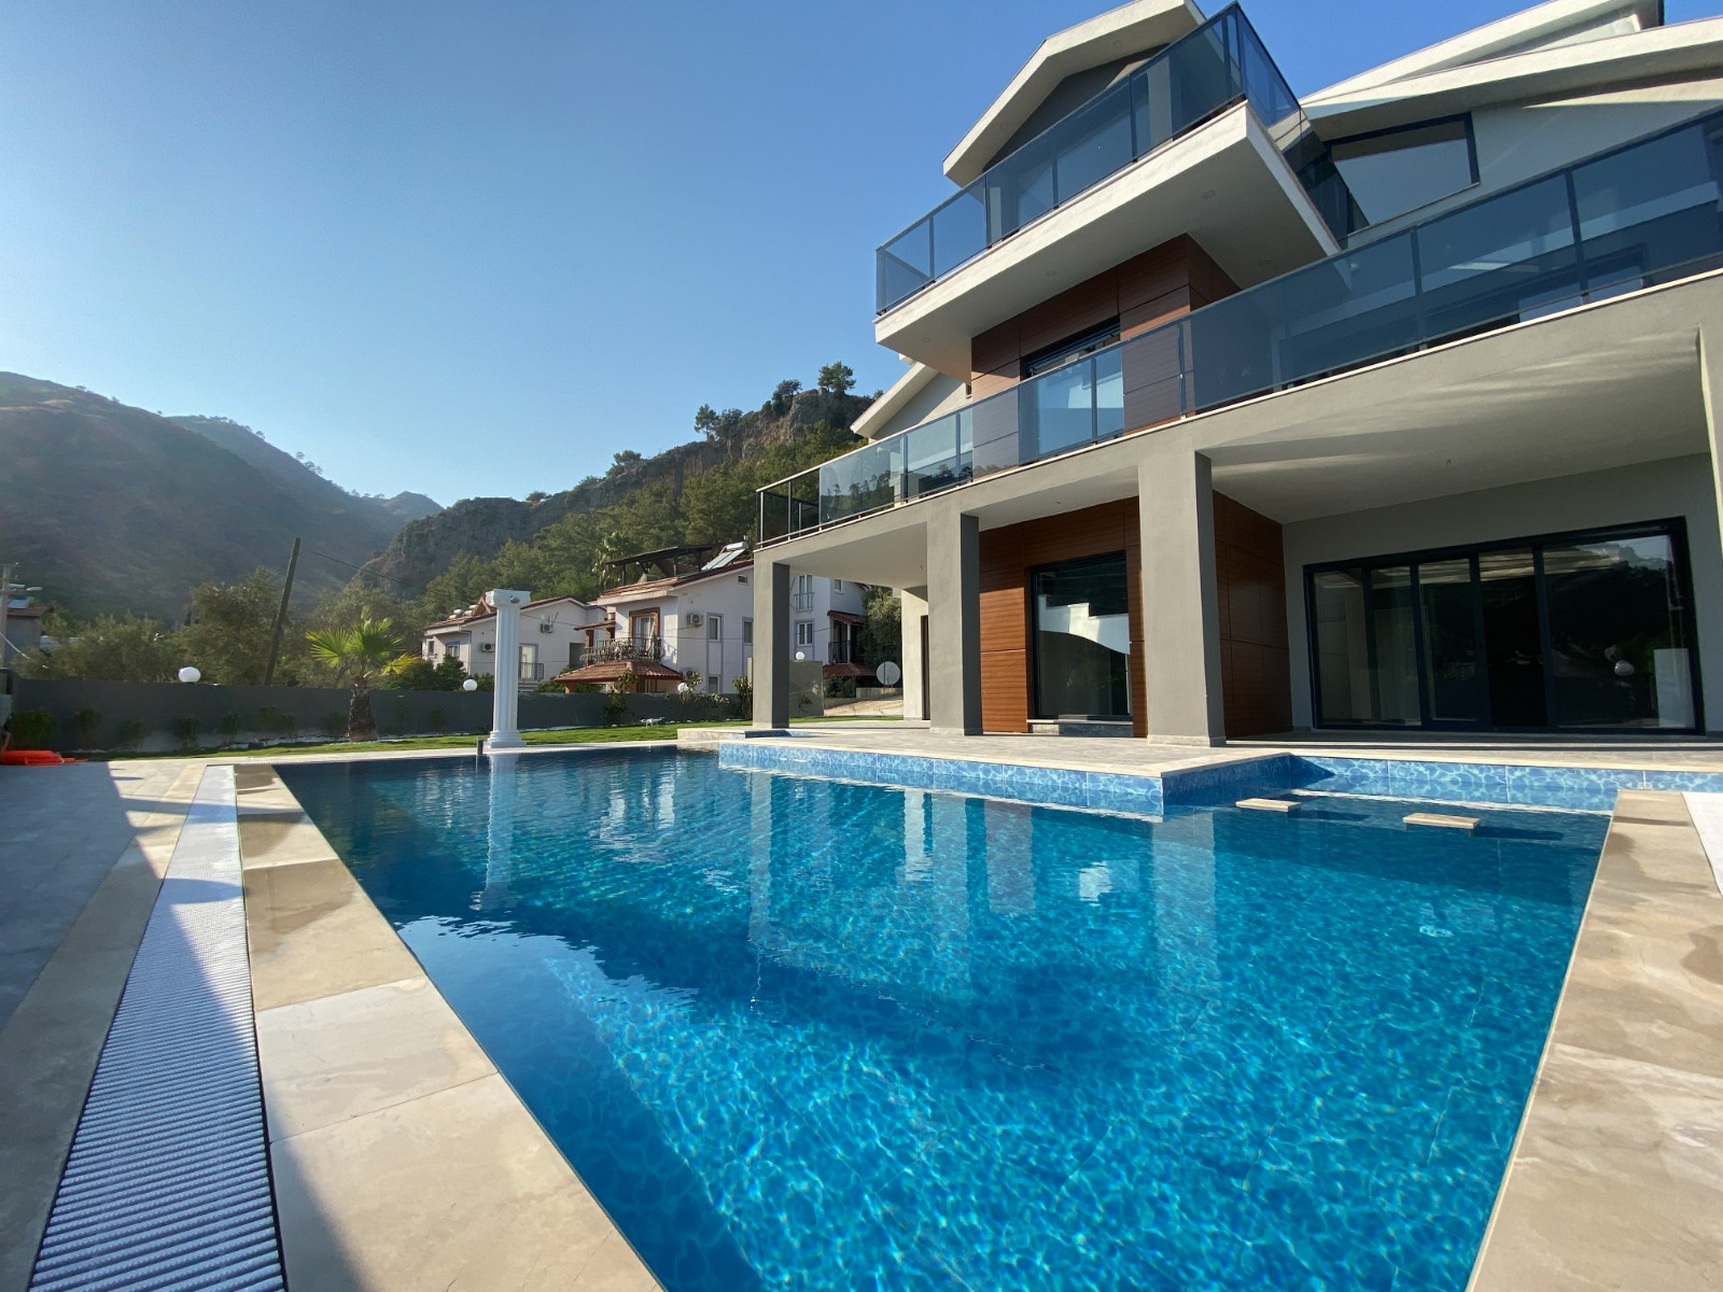 4 Bedroom Luxury Villas with Sea View & Swimming Pool For Sale